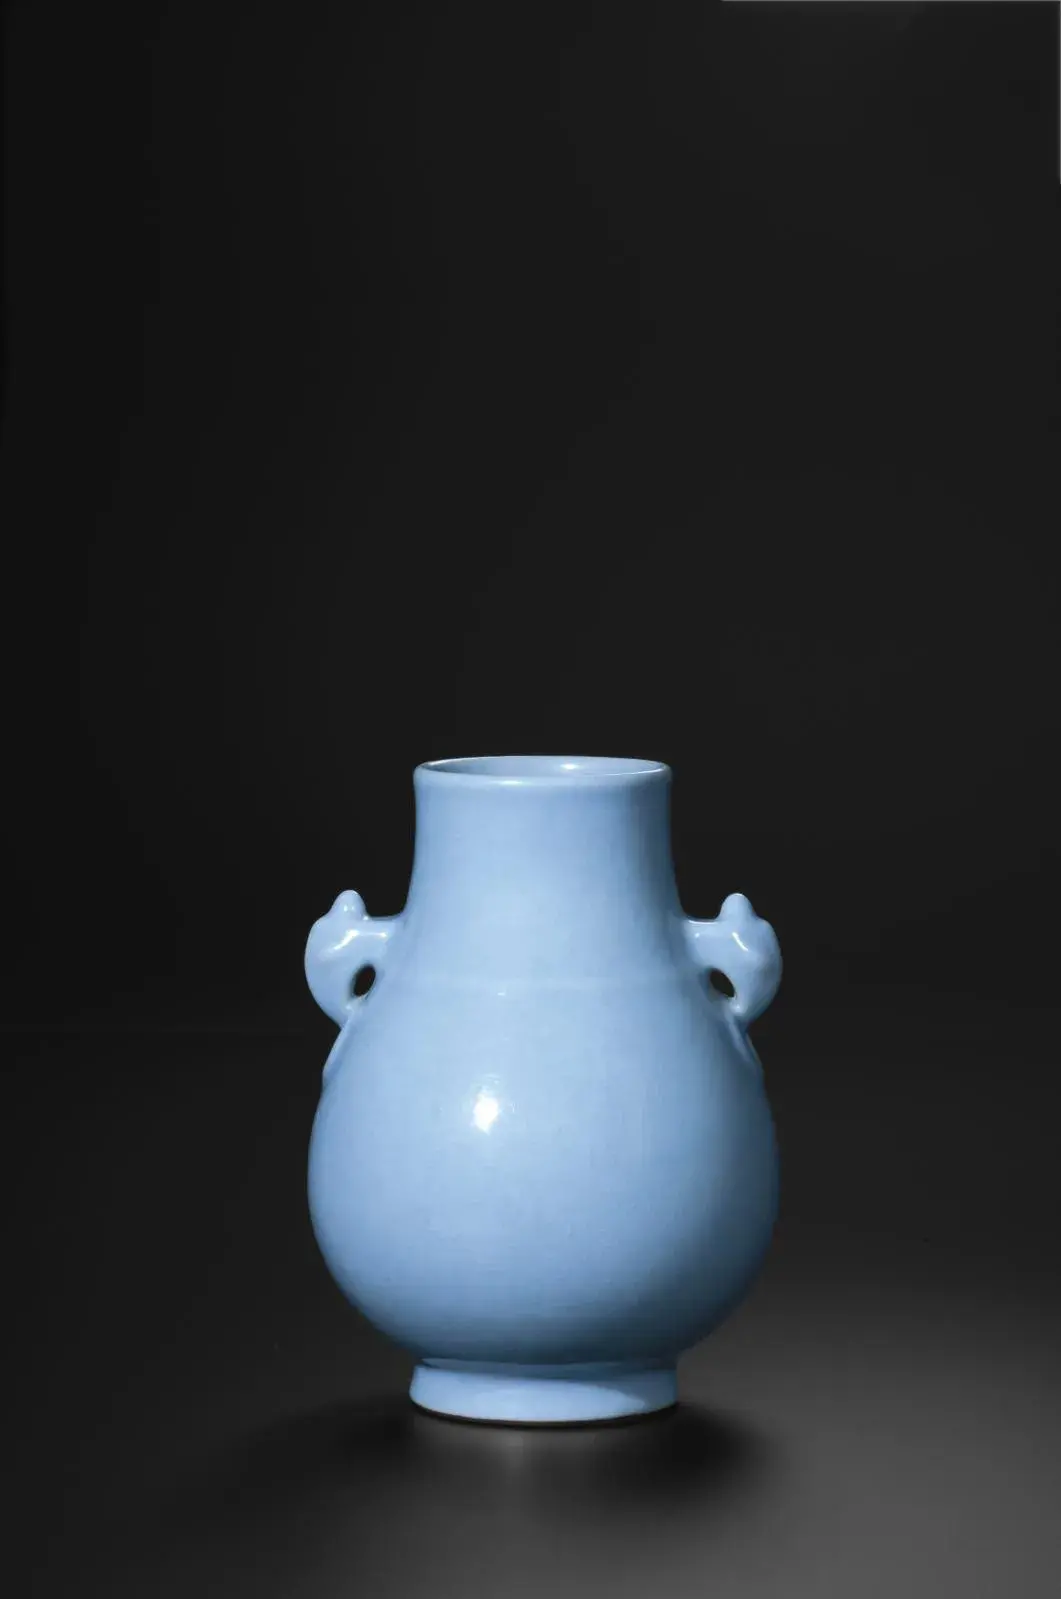 Vase with two handles with monster faces, porcelain, lavender-blue glaze, Jingdezhen kilns, Qing dynasty, Qianlong (1736-1795), h. 16.8 cm/6.3 in, diam. opening 6.7 cm/2.4 in, Zhuyuetang Collection.
Richard W.C. Kan's Zhuyuetang collection/photo: Barry Lui